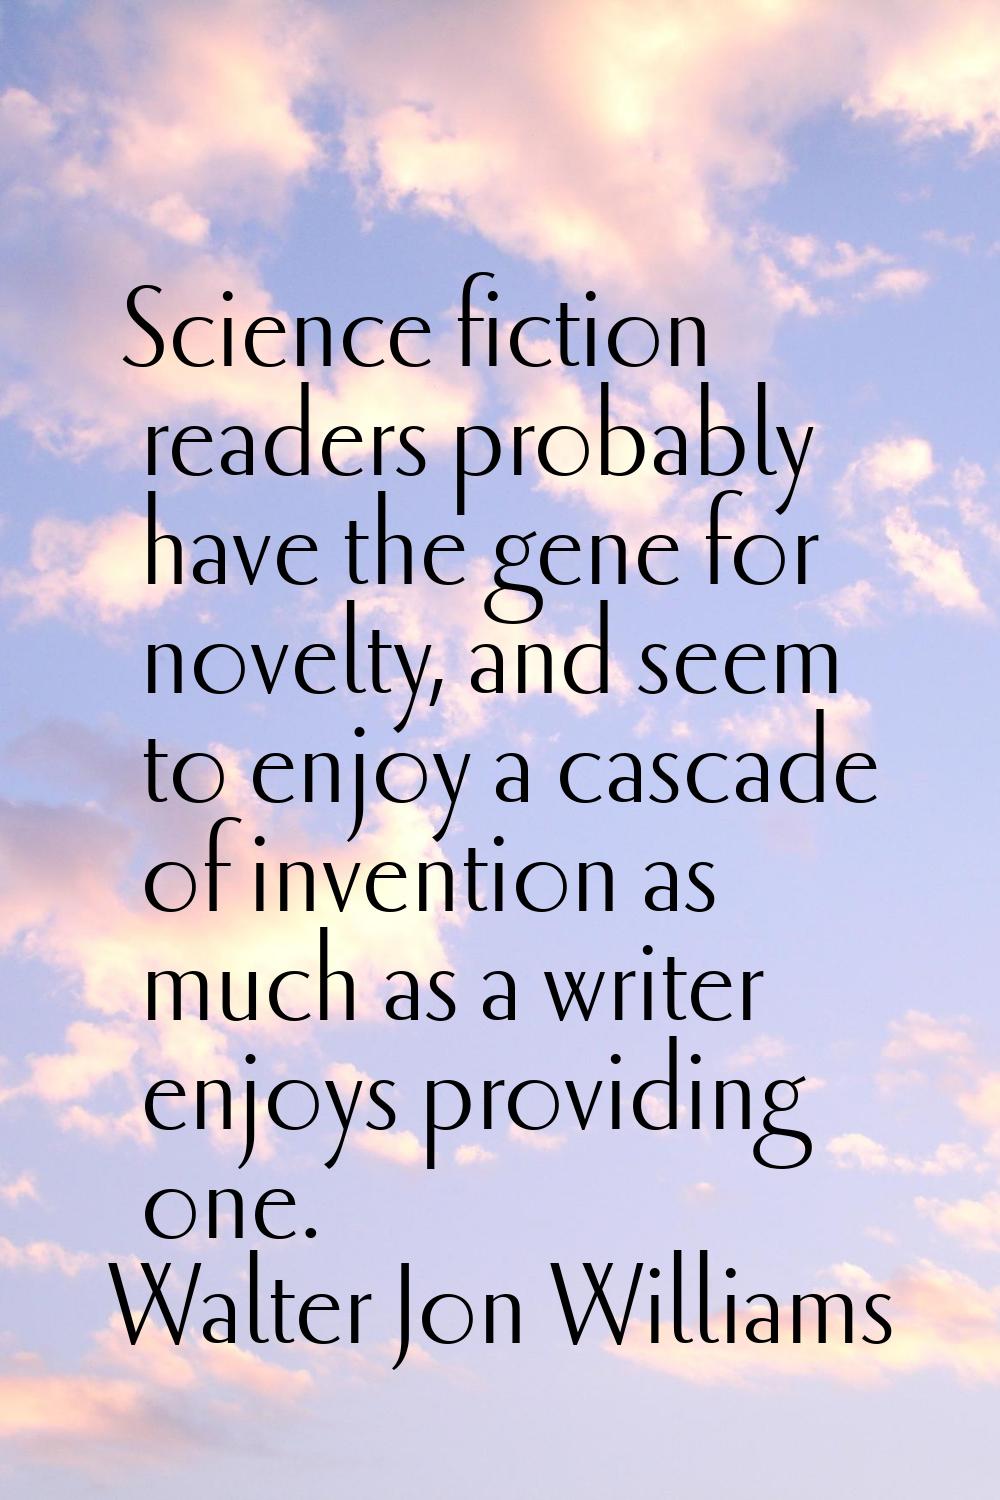 Science fiction readers probably have the gene for novelty, and seem to enjoy a cascade of inventio